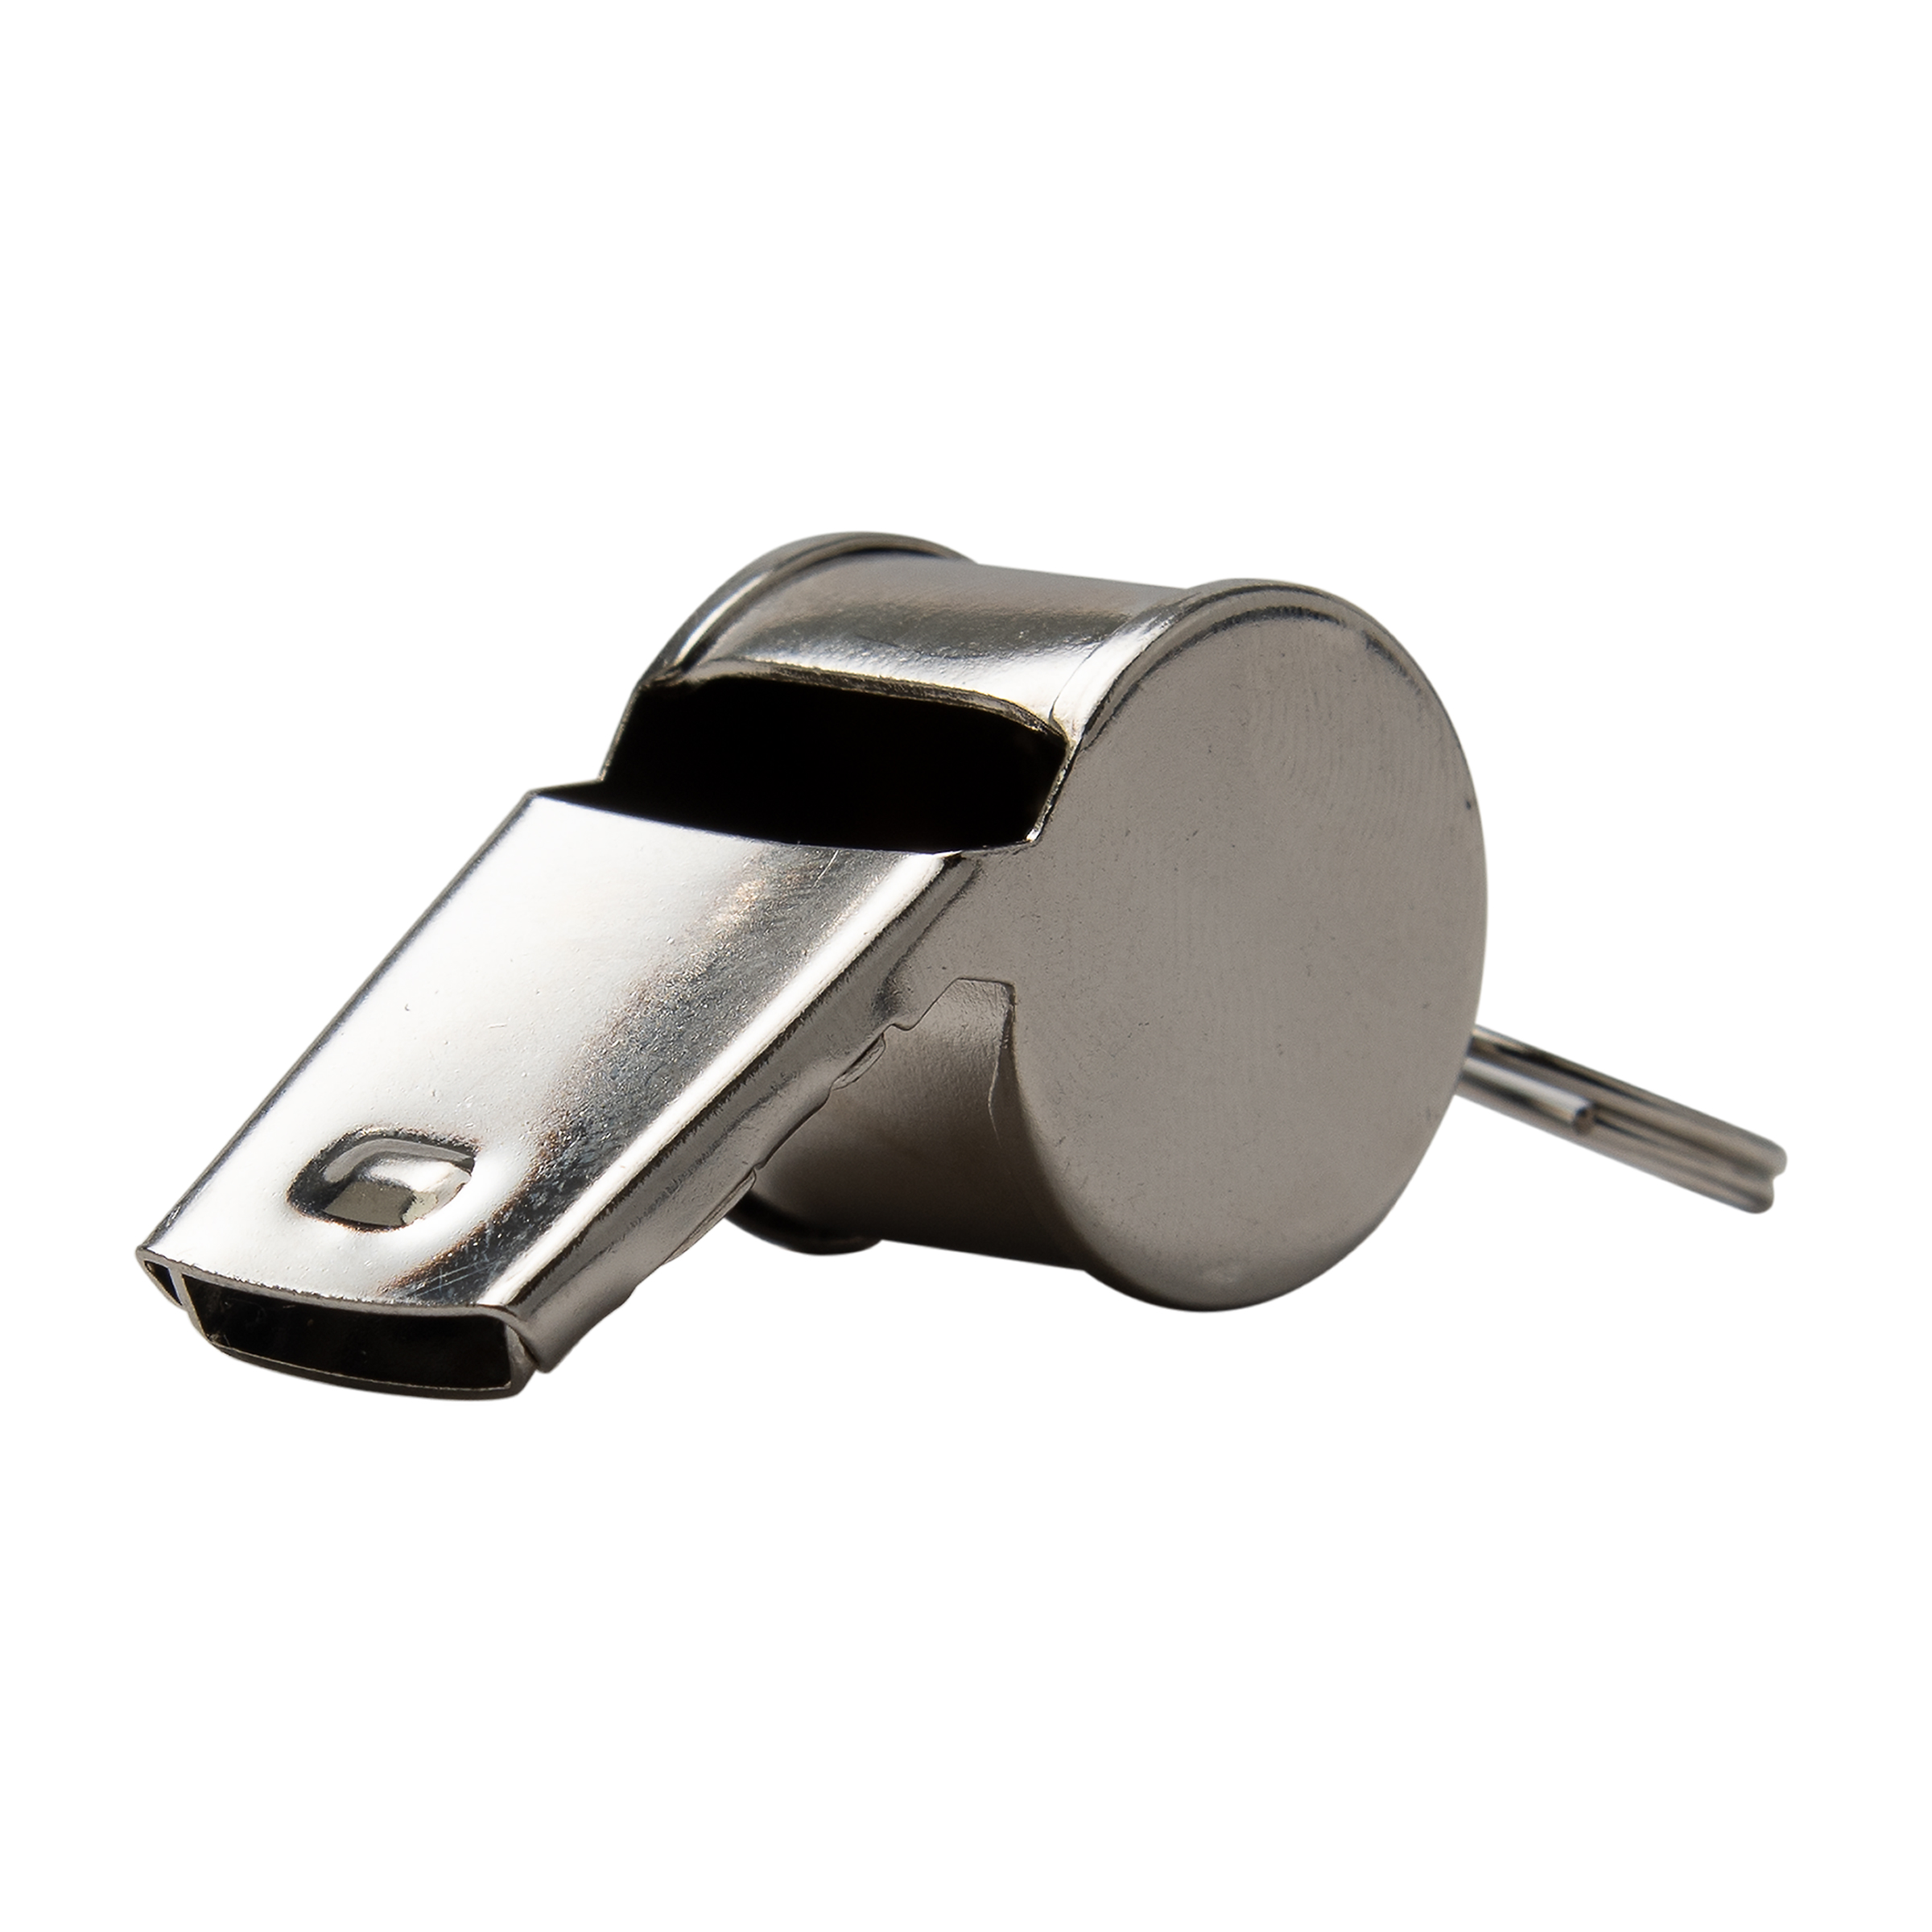 Spalding Metal Whistle - image 1 of 4